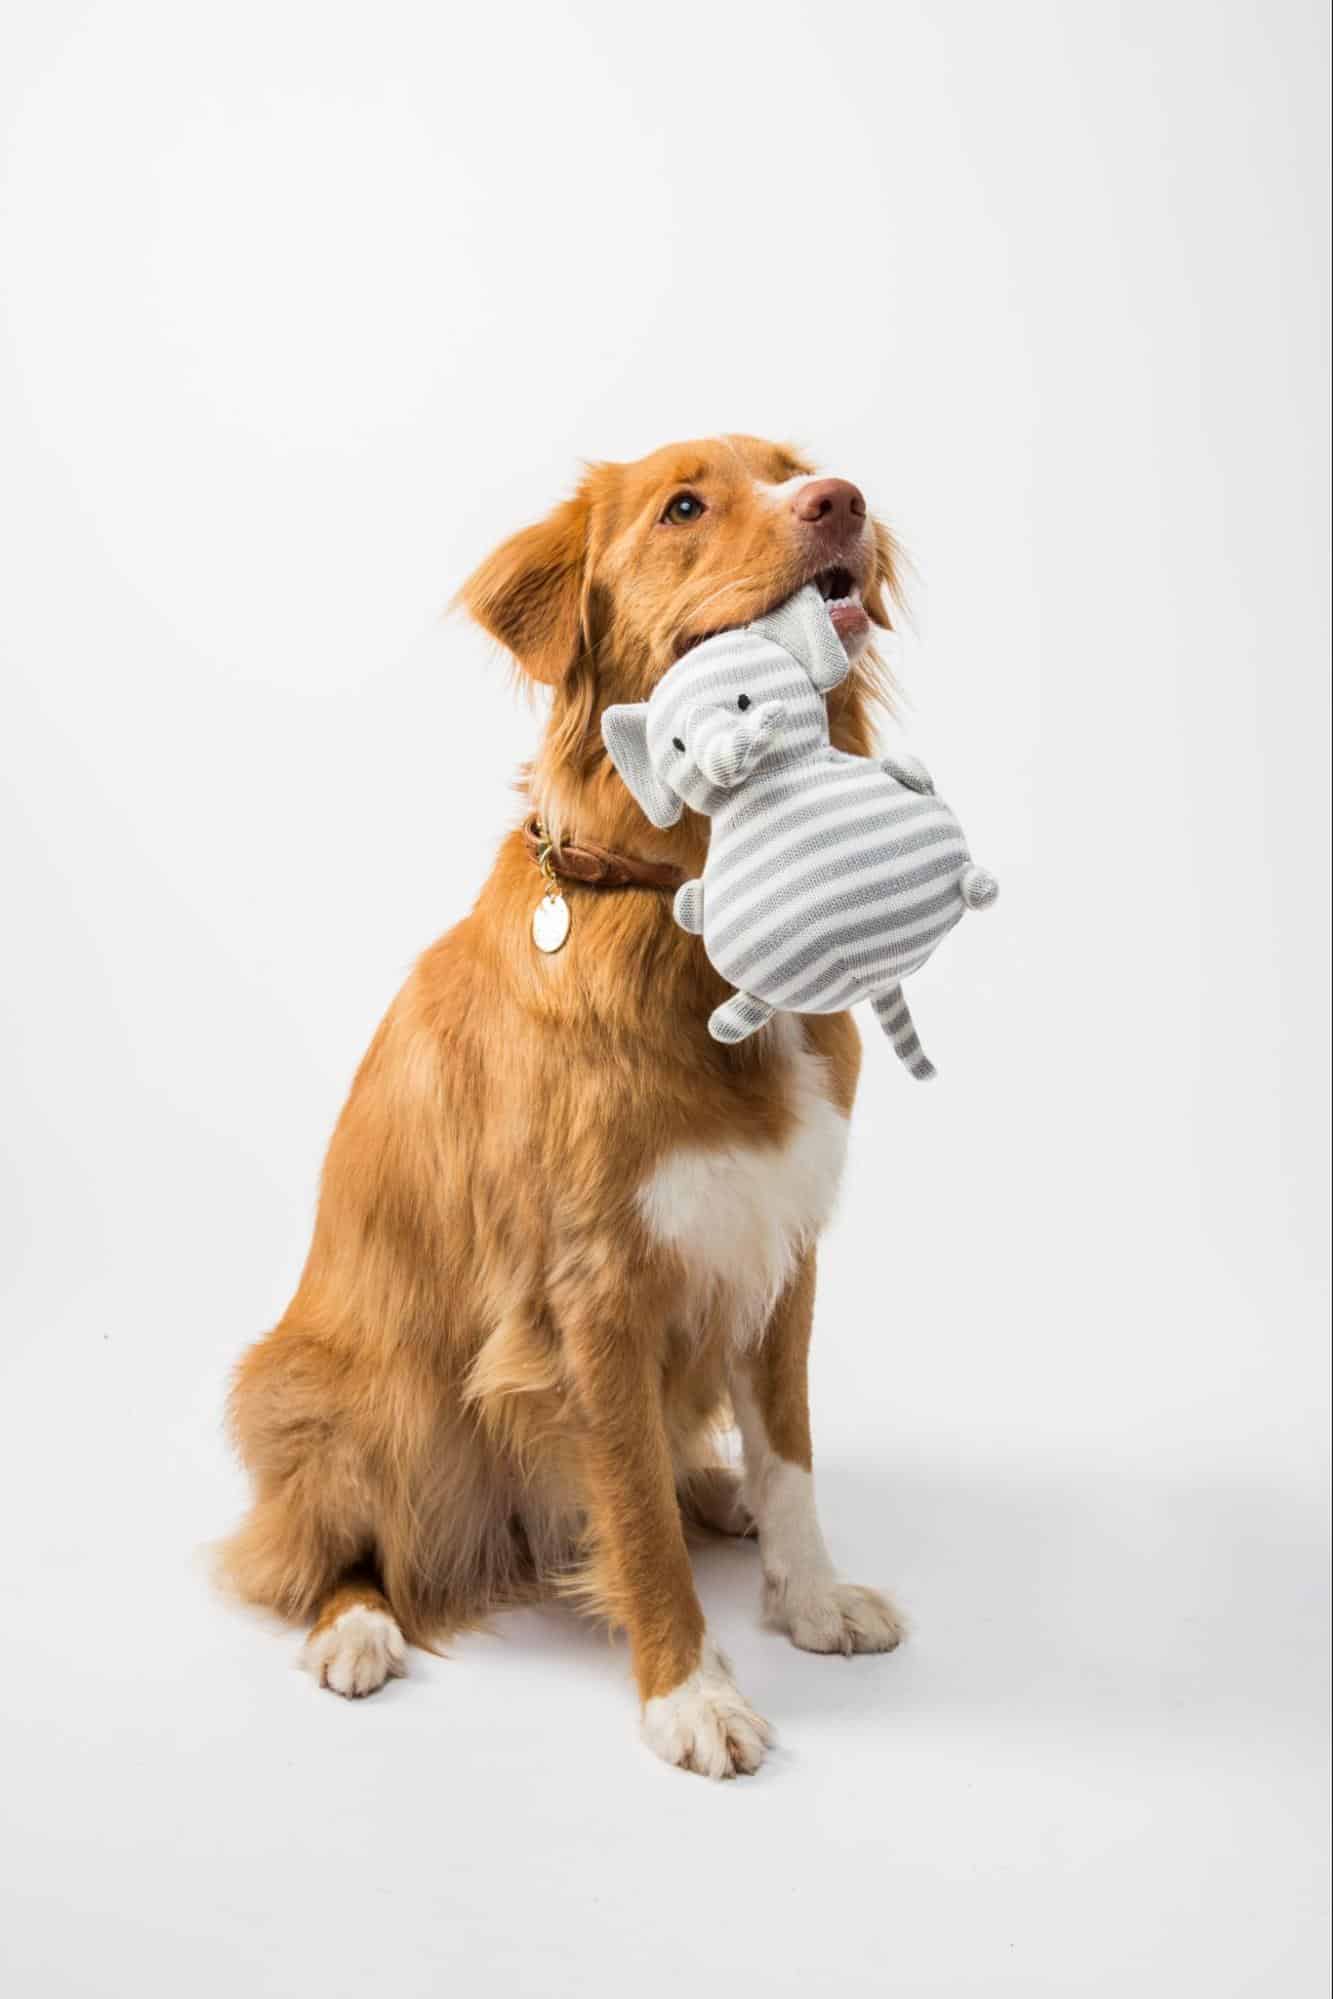 The Best 12 Interactive Dog Toys to Keep Your Canine Busy 